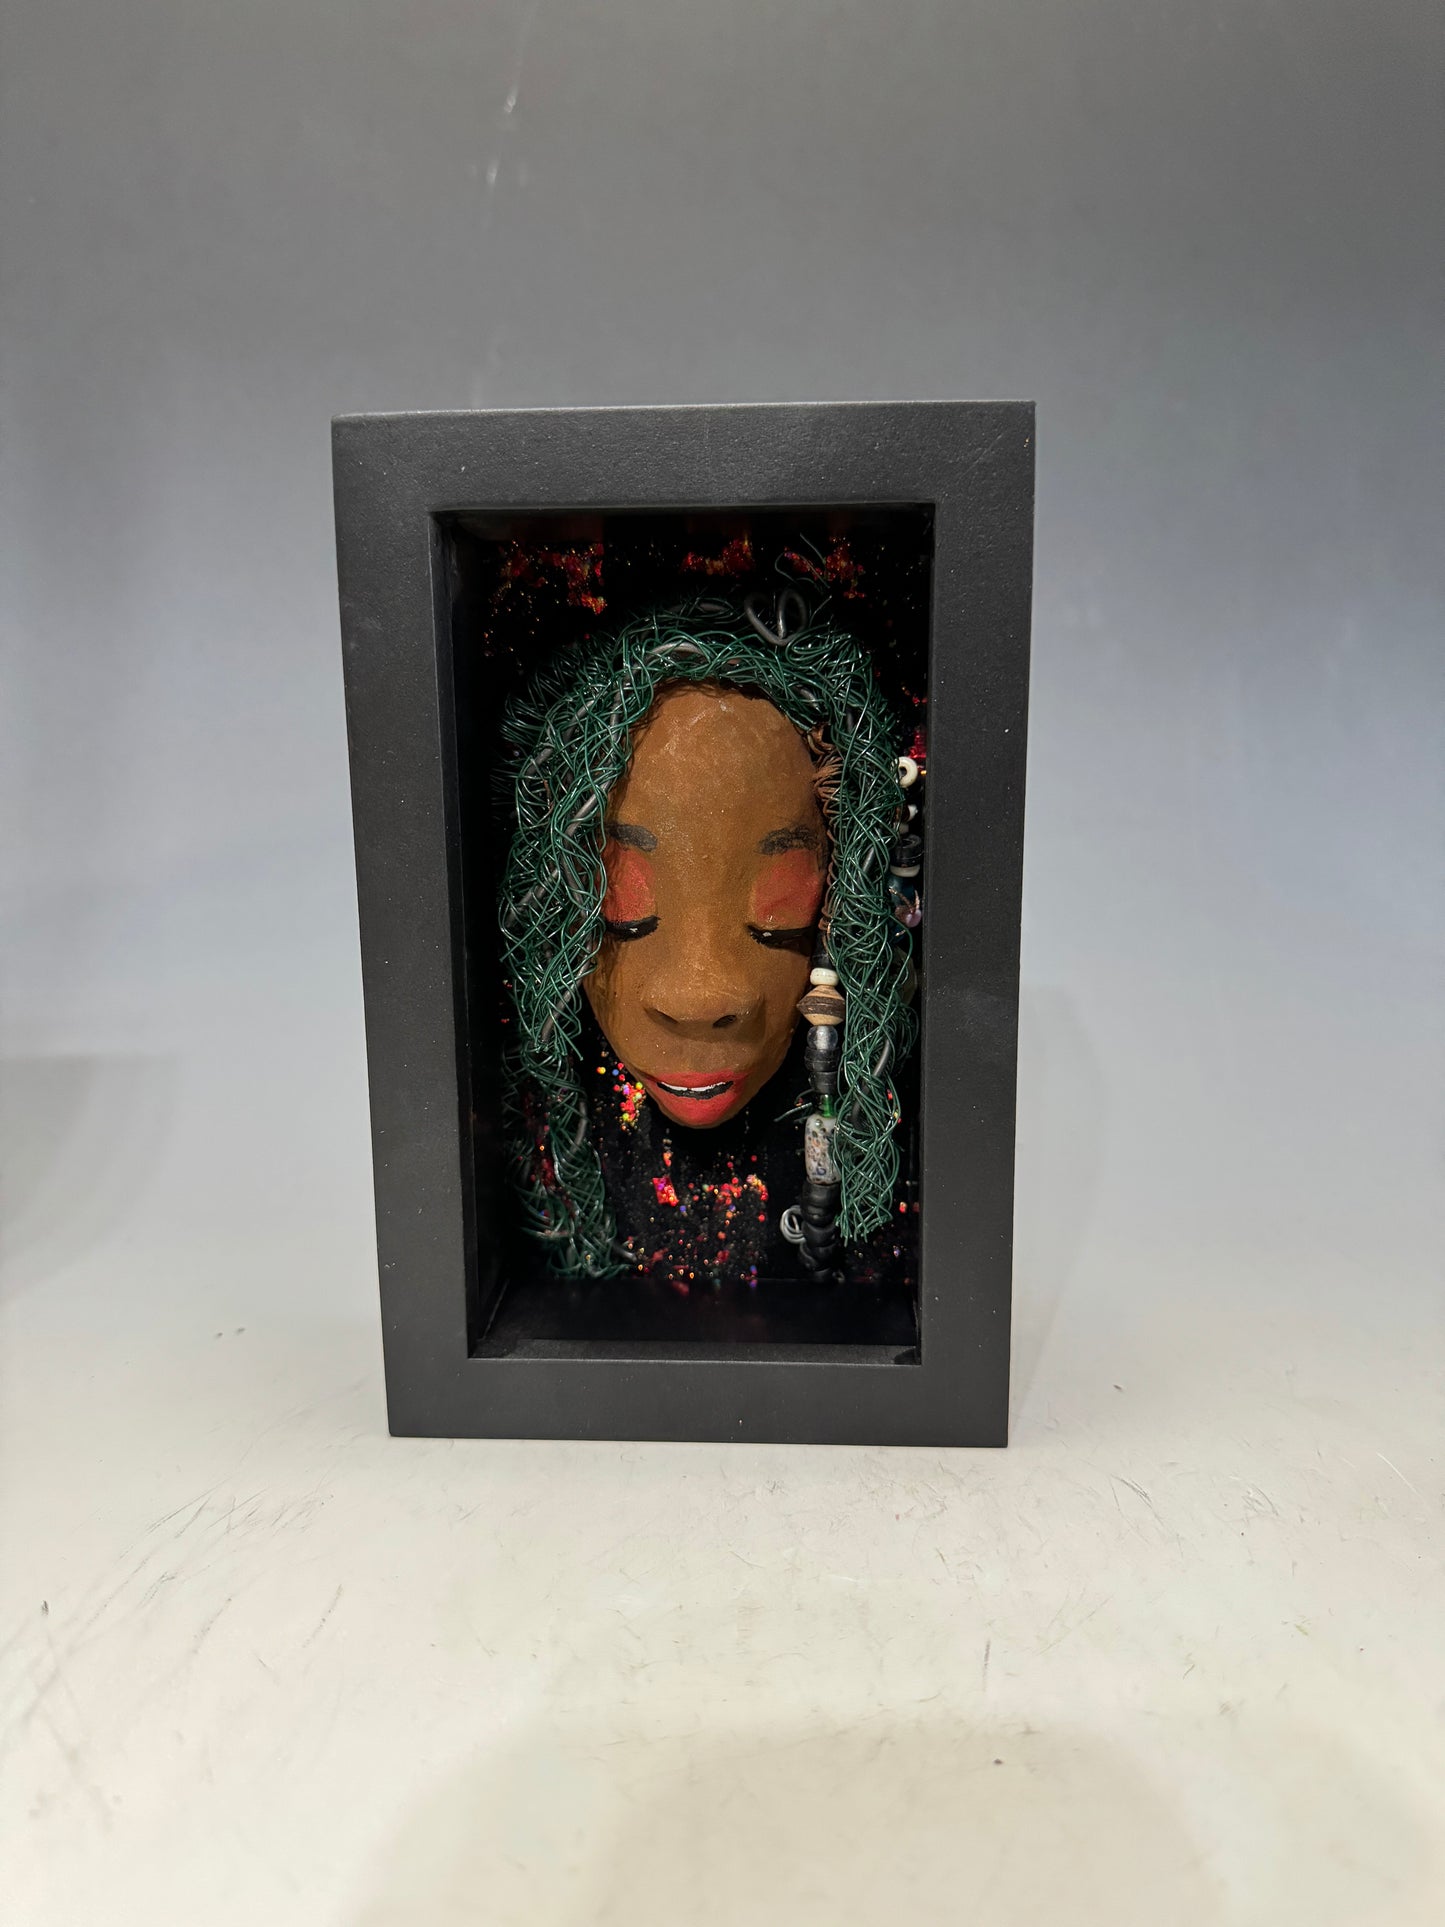 Marjorie is a mixed media mask crafted with the raku firing technique, displaying carefully detailed characteristics such as honey brown skin, Ruby red lips, and intricately woven hair made from 16 and 24-gauge wire. This stunning piece is mounted on a hand-painted canvas, surrounded by a beautifully landscaped background, and elegantly displayed in a glass-covered 4" x 6" black shadowbox.